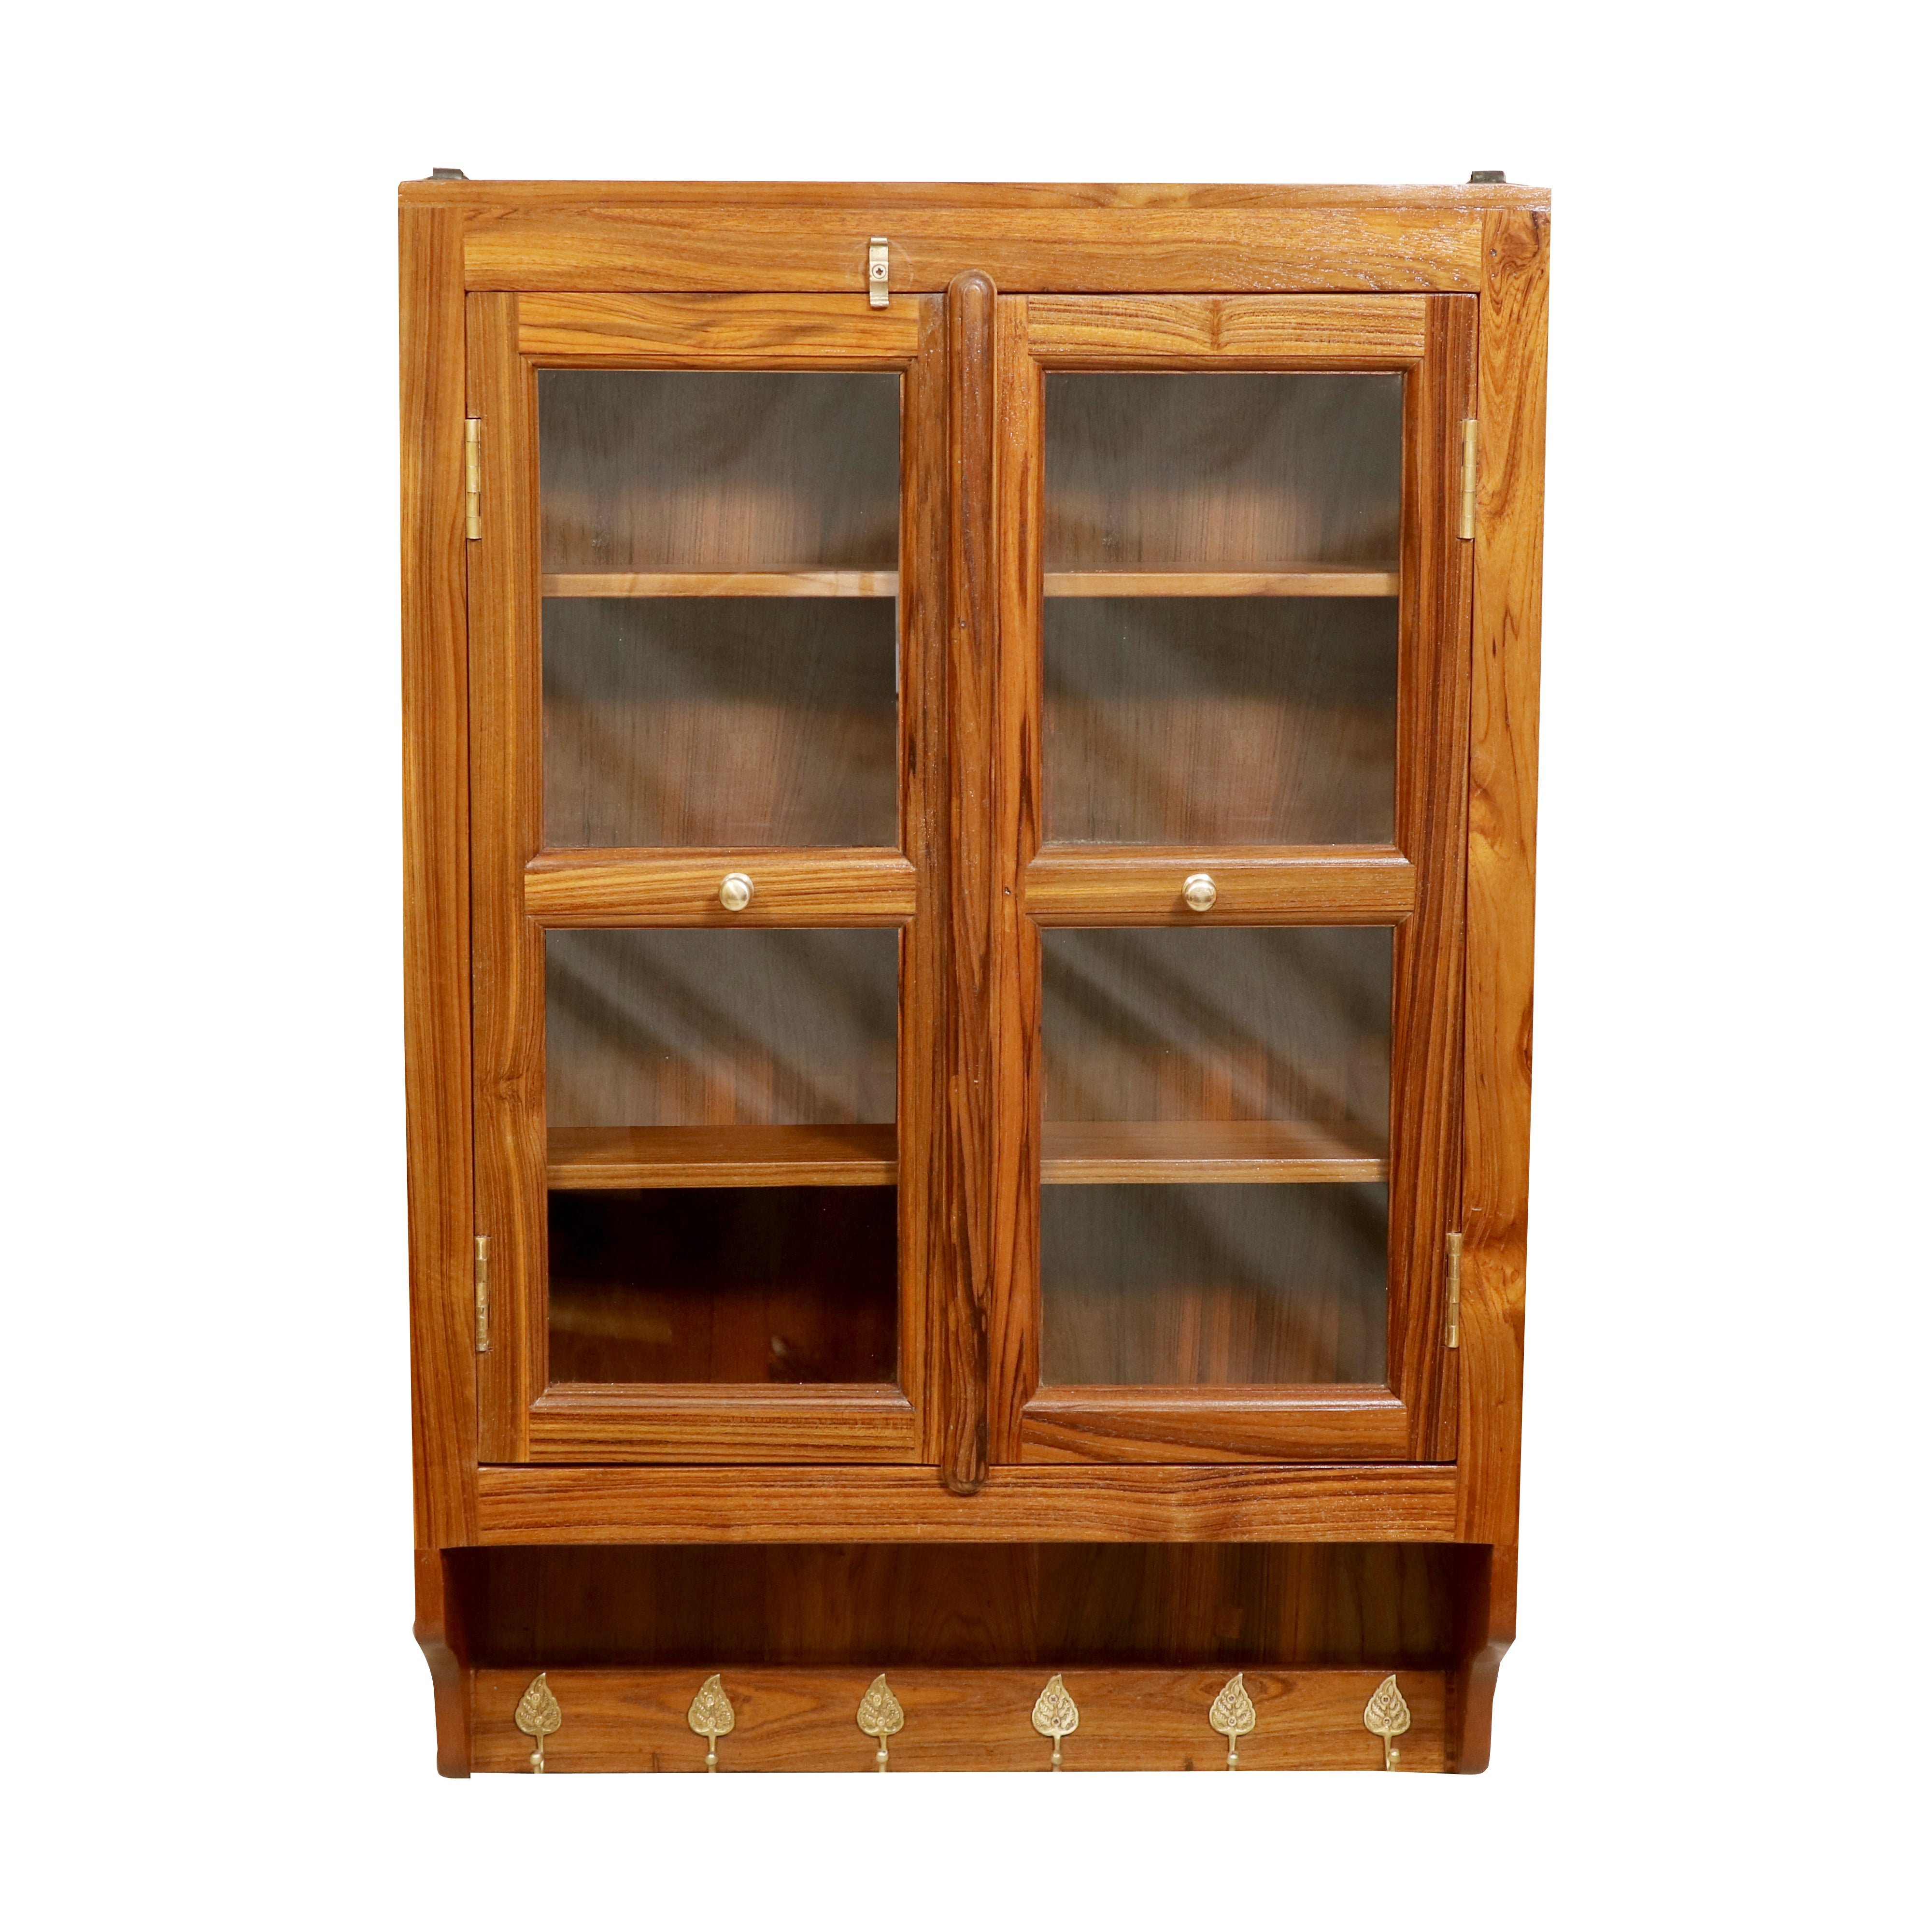 24 x 7 x 36 Inch Glass and Teak Wooden Wall Cabinet Wall Cabinet